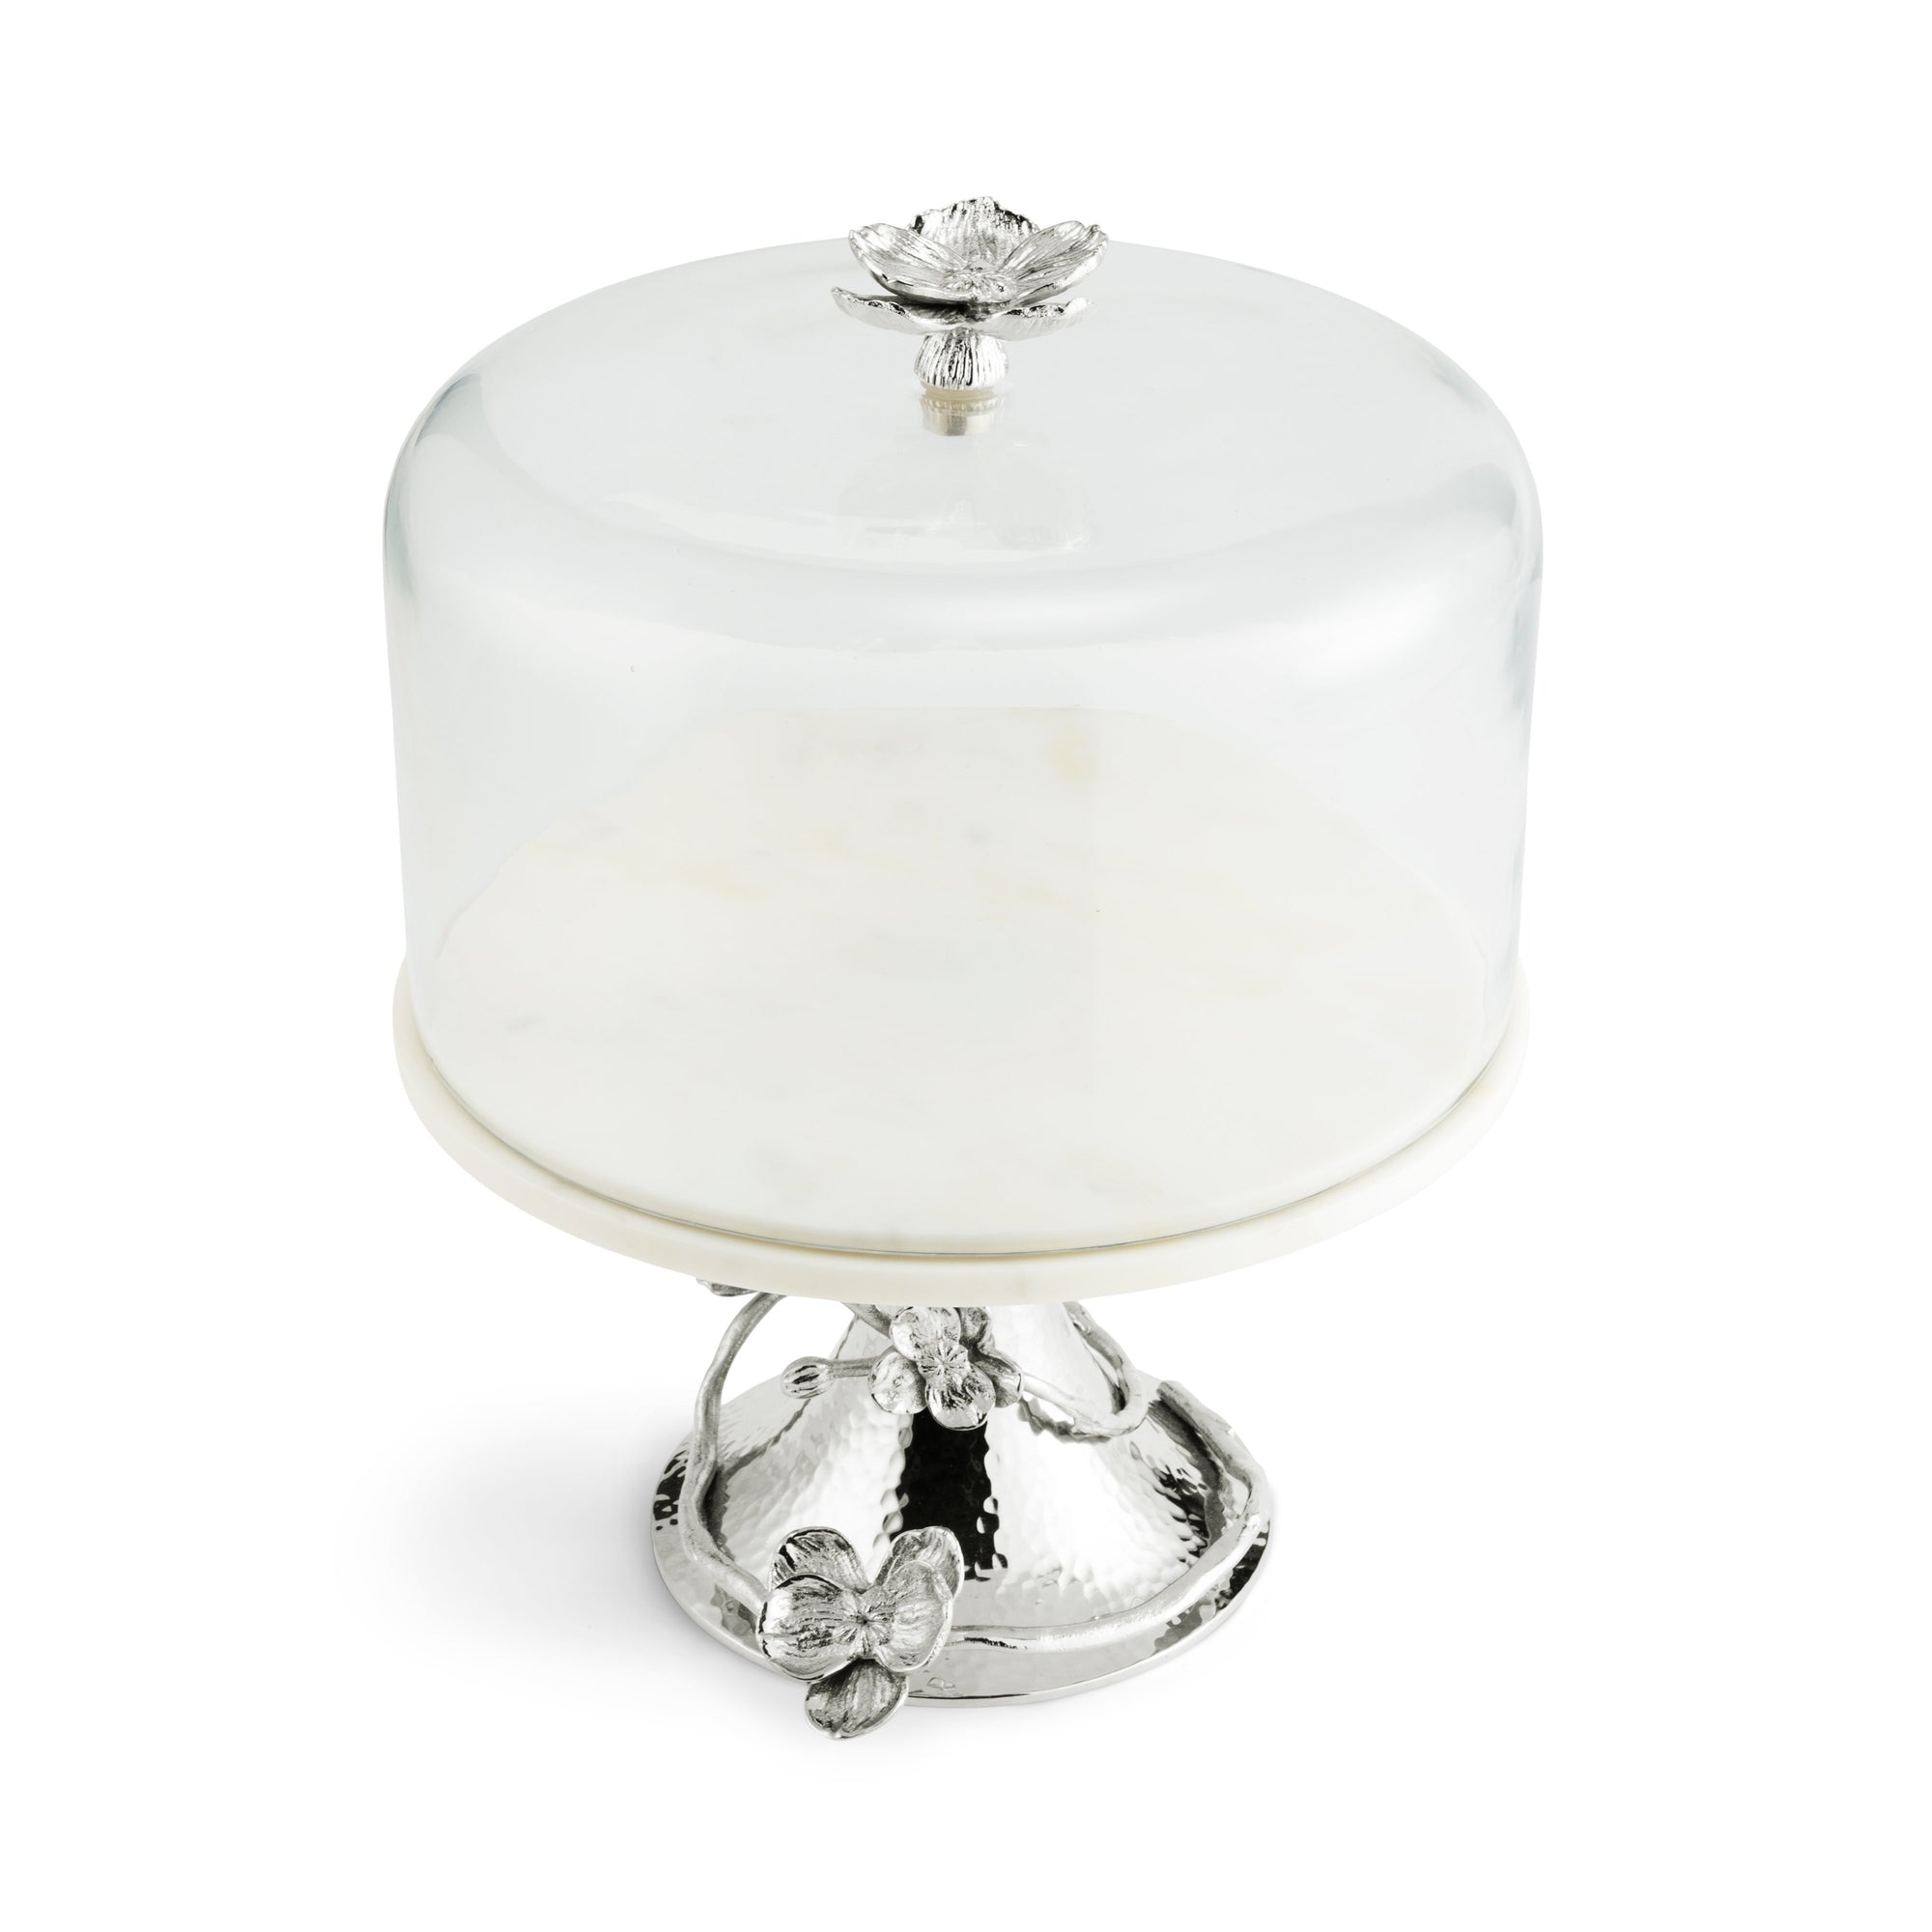 Michael Aram White Orchid Cake Stand w/ Dome